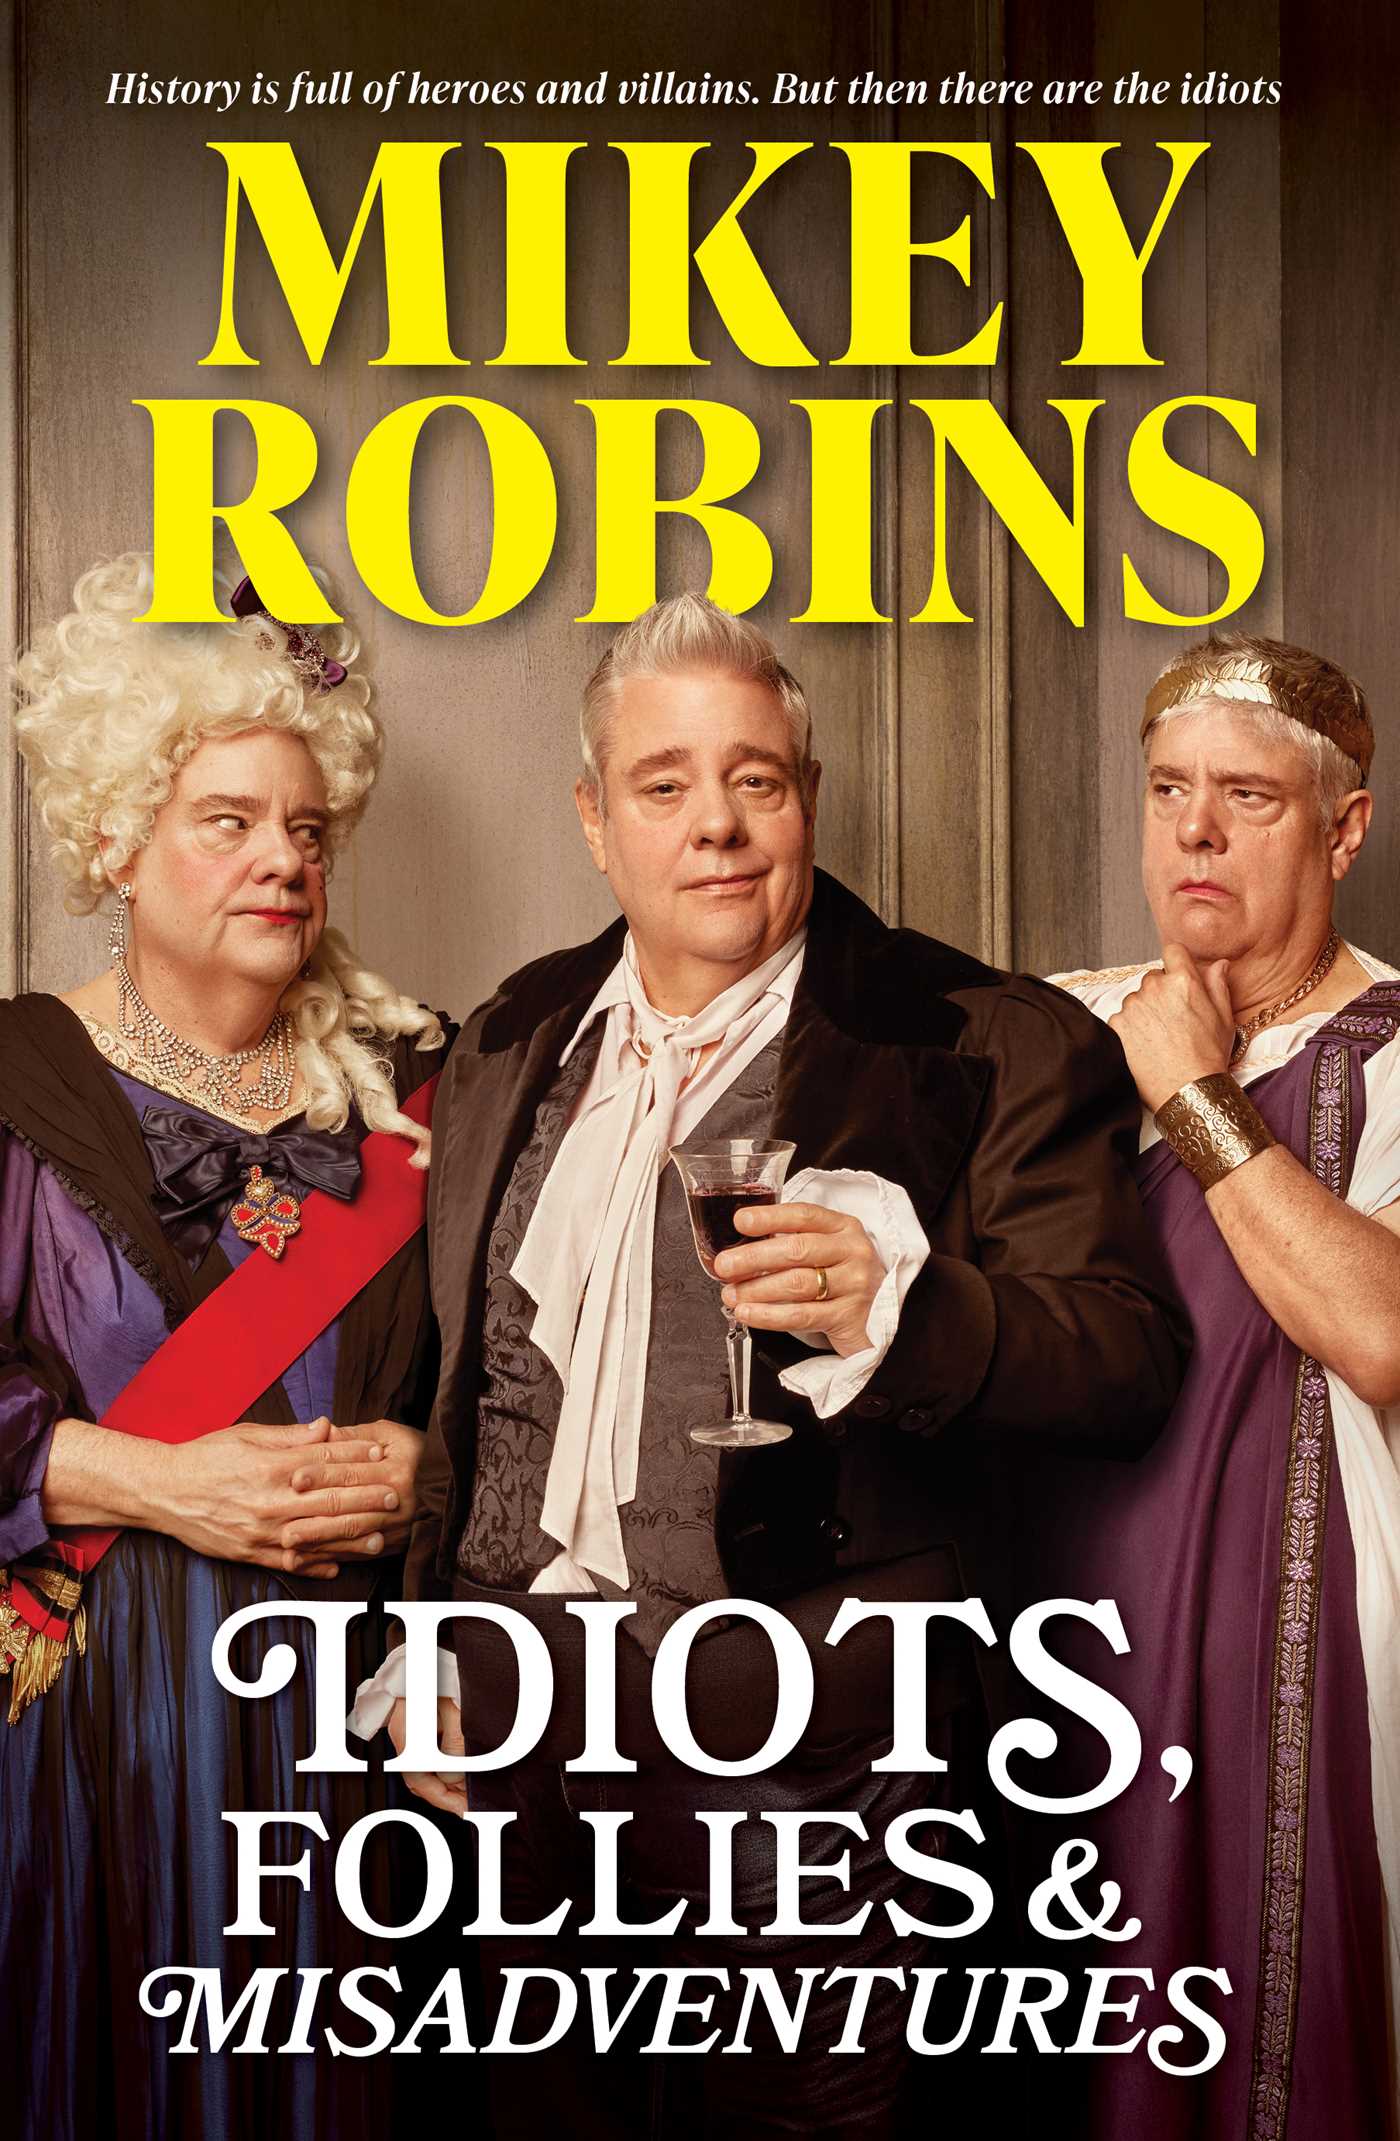 Robins　Idiots,　Misadventures　Hartog　Follies　by　9781761107115　and　Mikey　Harry